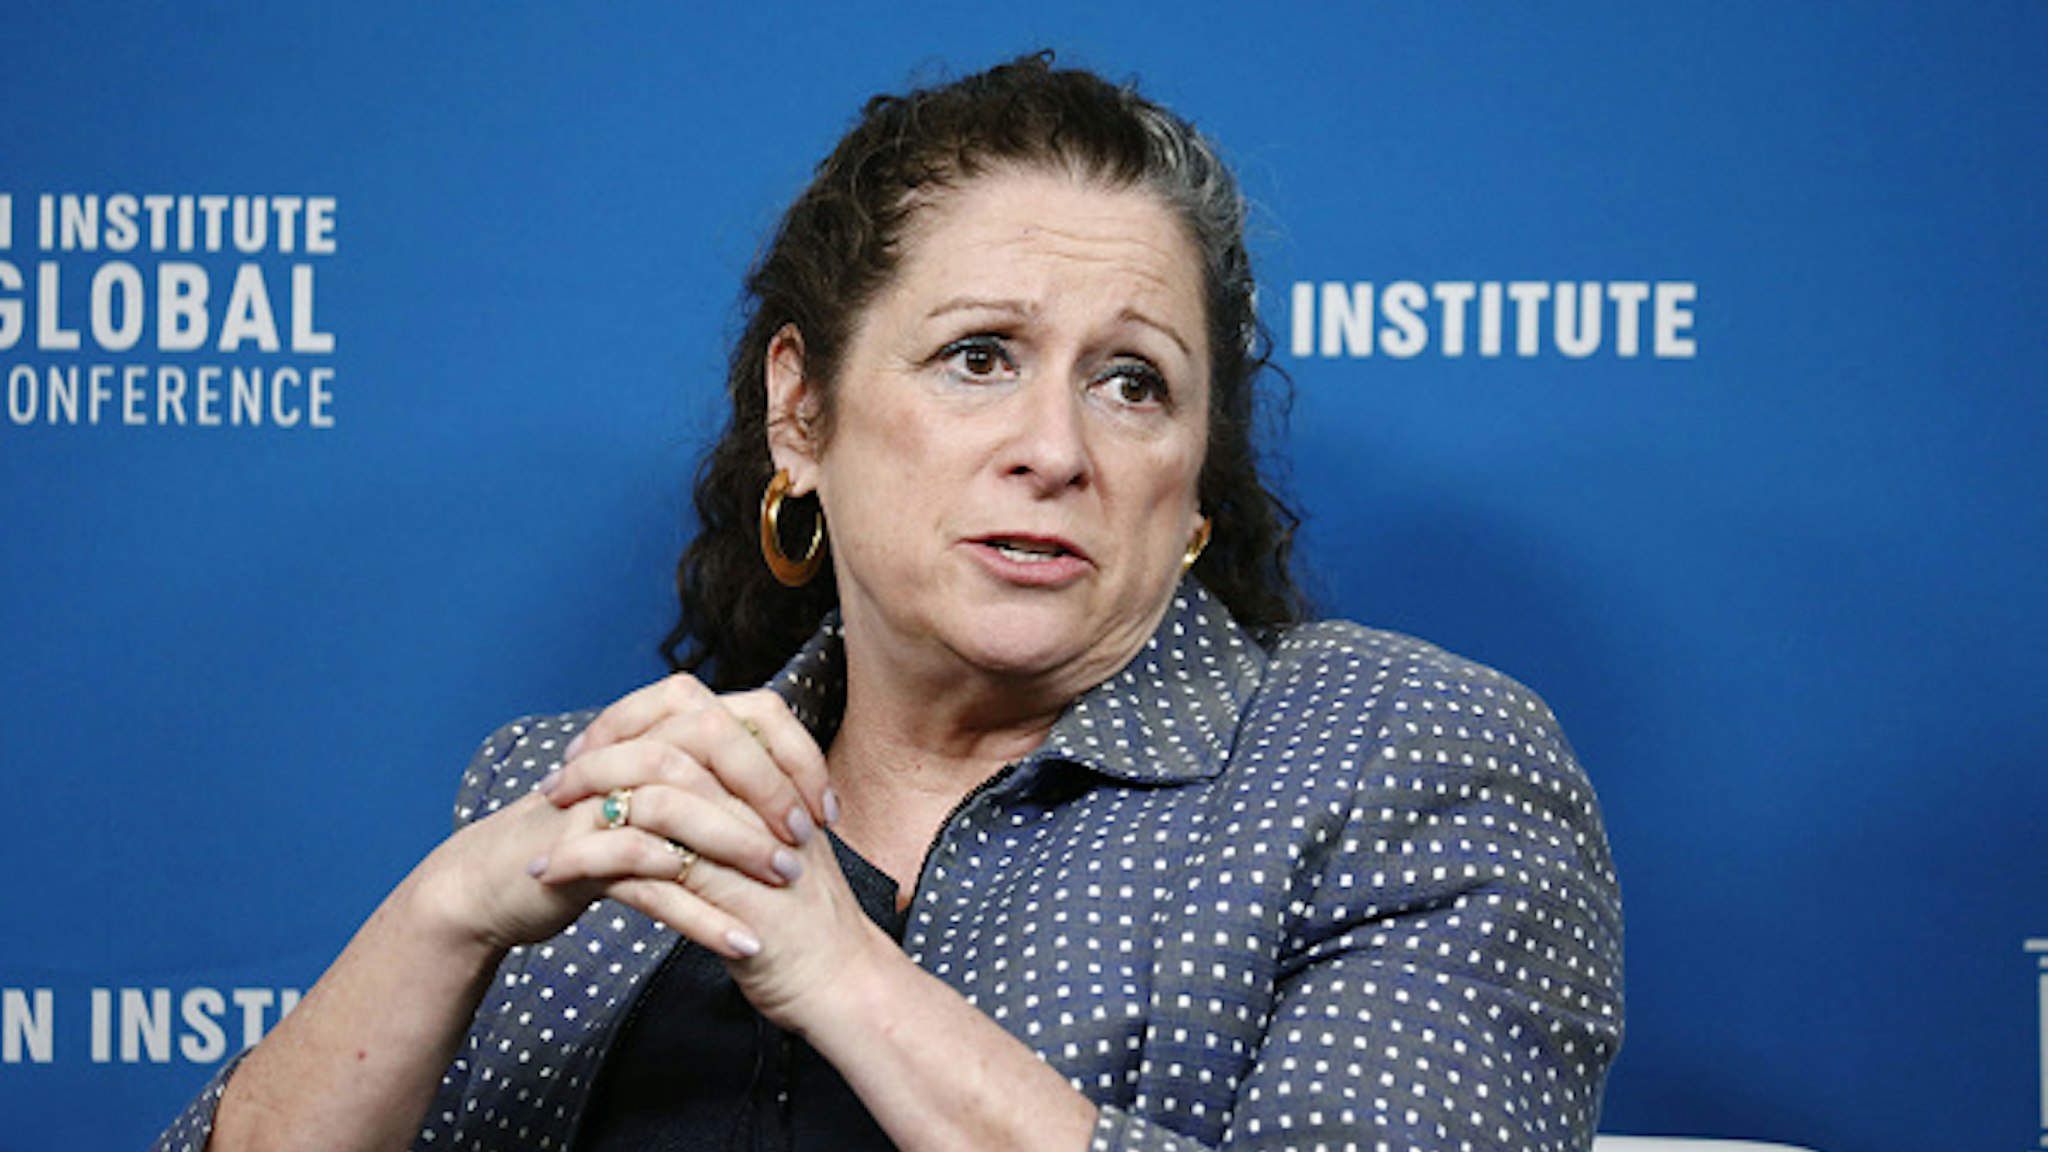 Abigail Disney, president and chief executive officer of Fork Films, speaks during the Milken Institute Global Conference in Beverly Hills, California, U.S., on Tuesday, April 30, 2019. The conference brings together leaders in business, government, technology, philanthropy, academia, and the media to discuss actionable and collaborative solutions to some of the most important questions of our time.